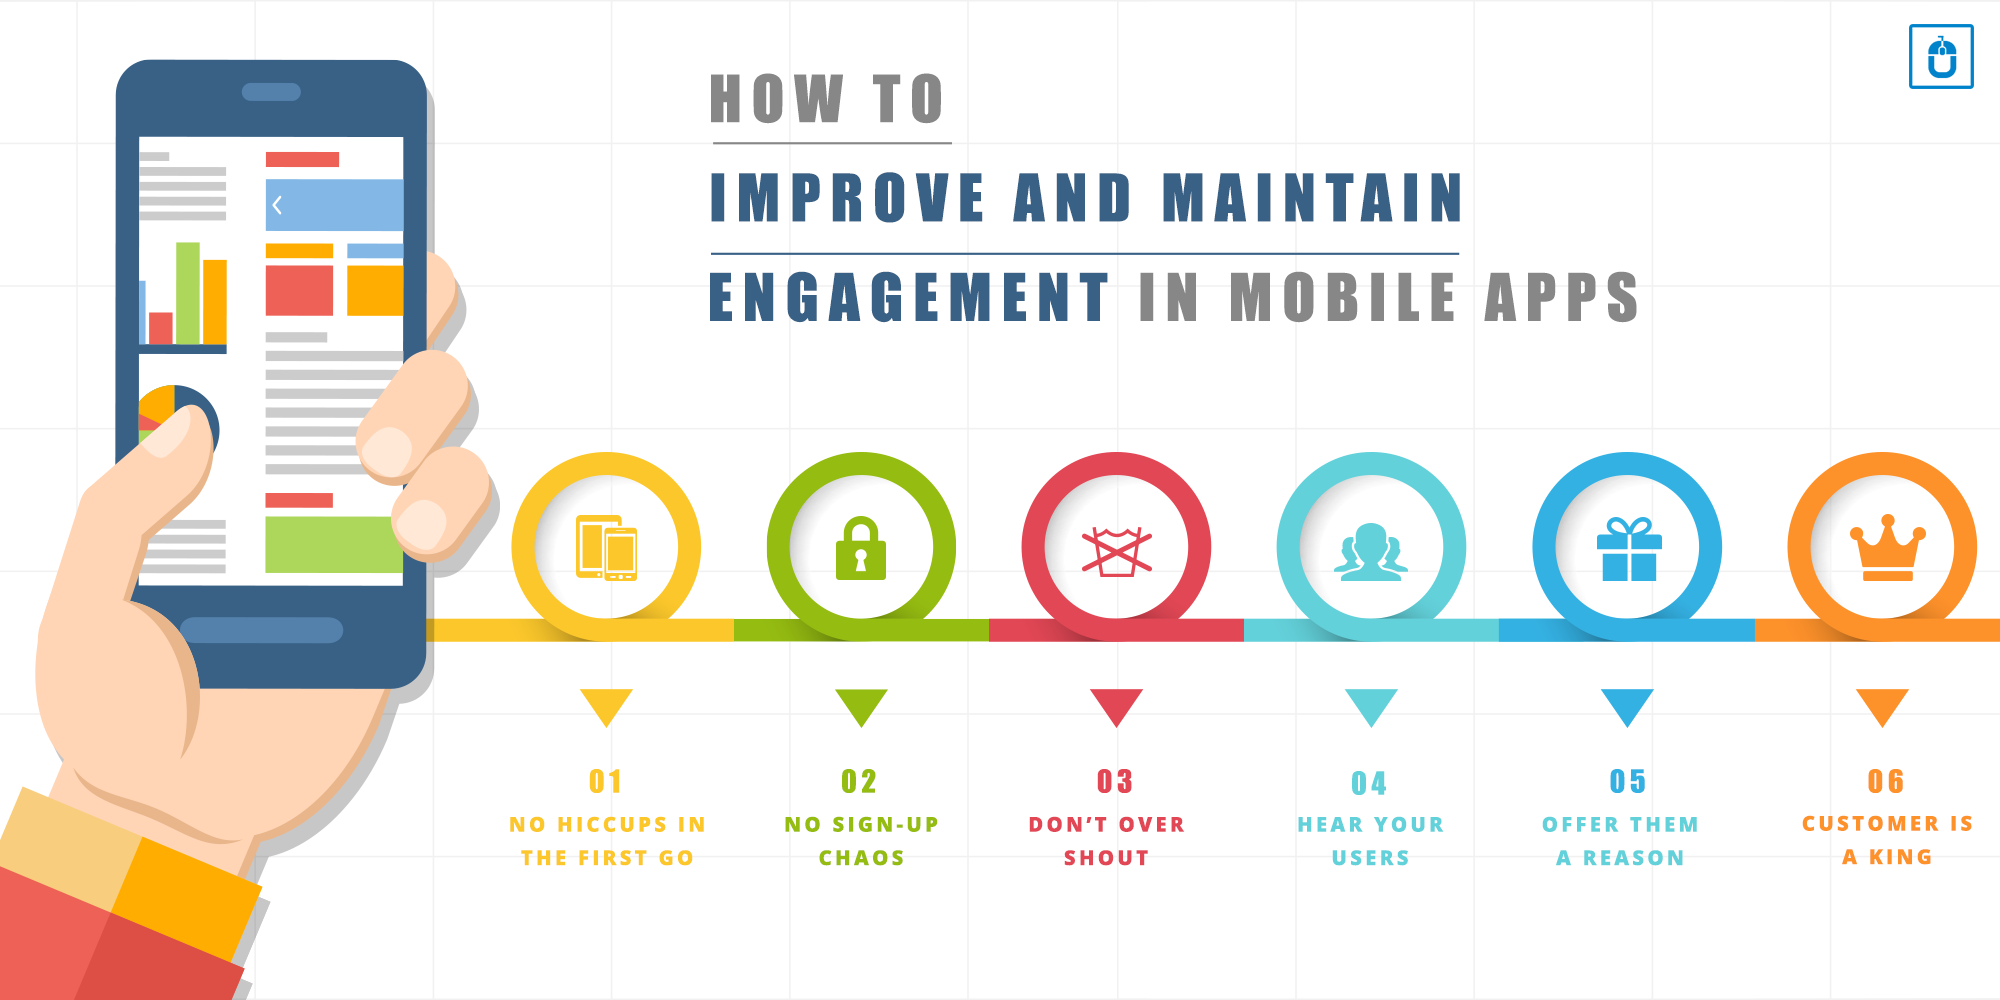 How To Improve And Maintain Engagement In Mobile Apps